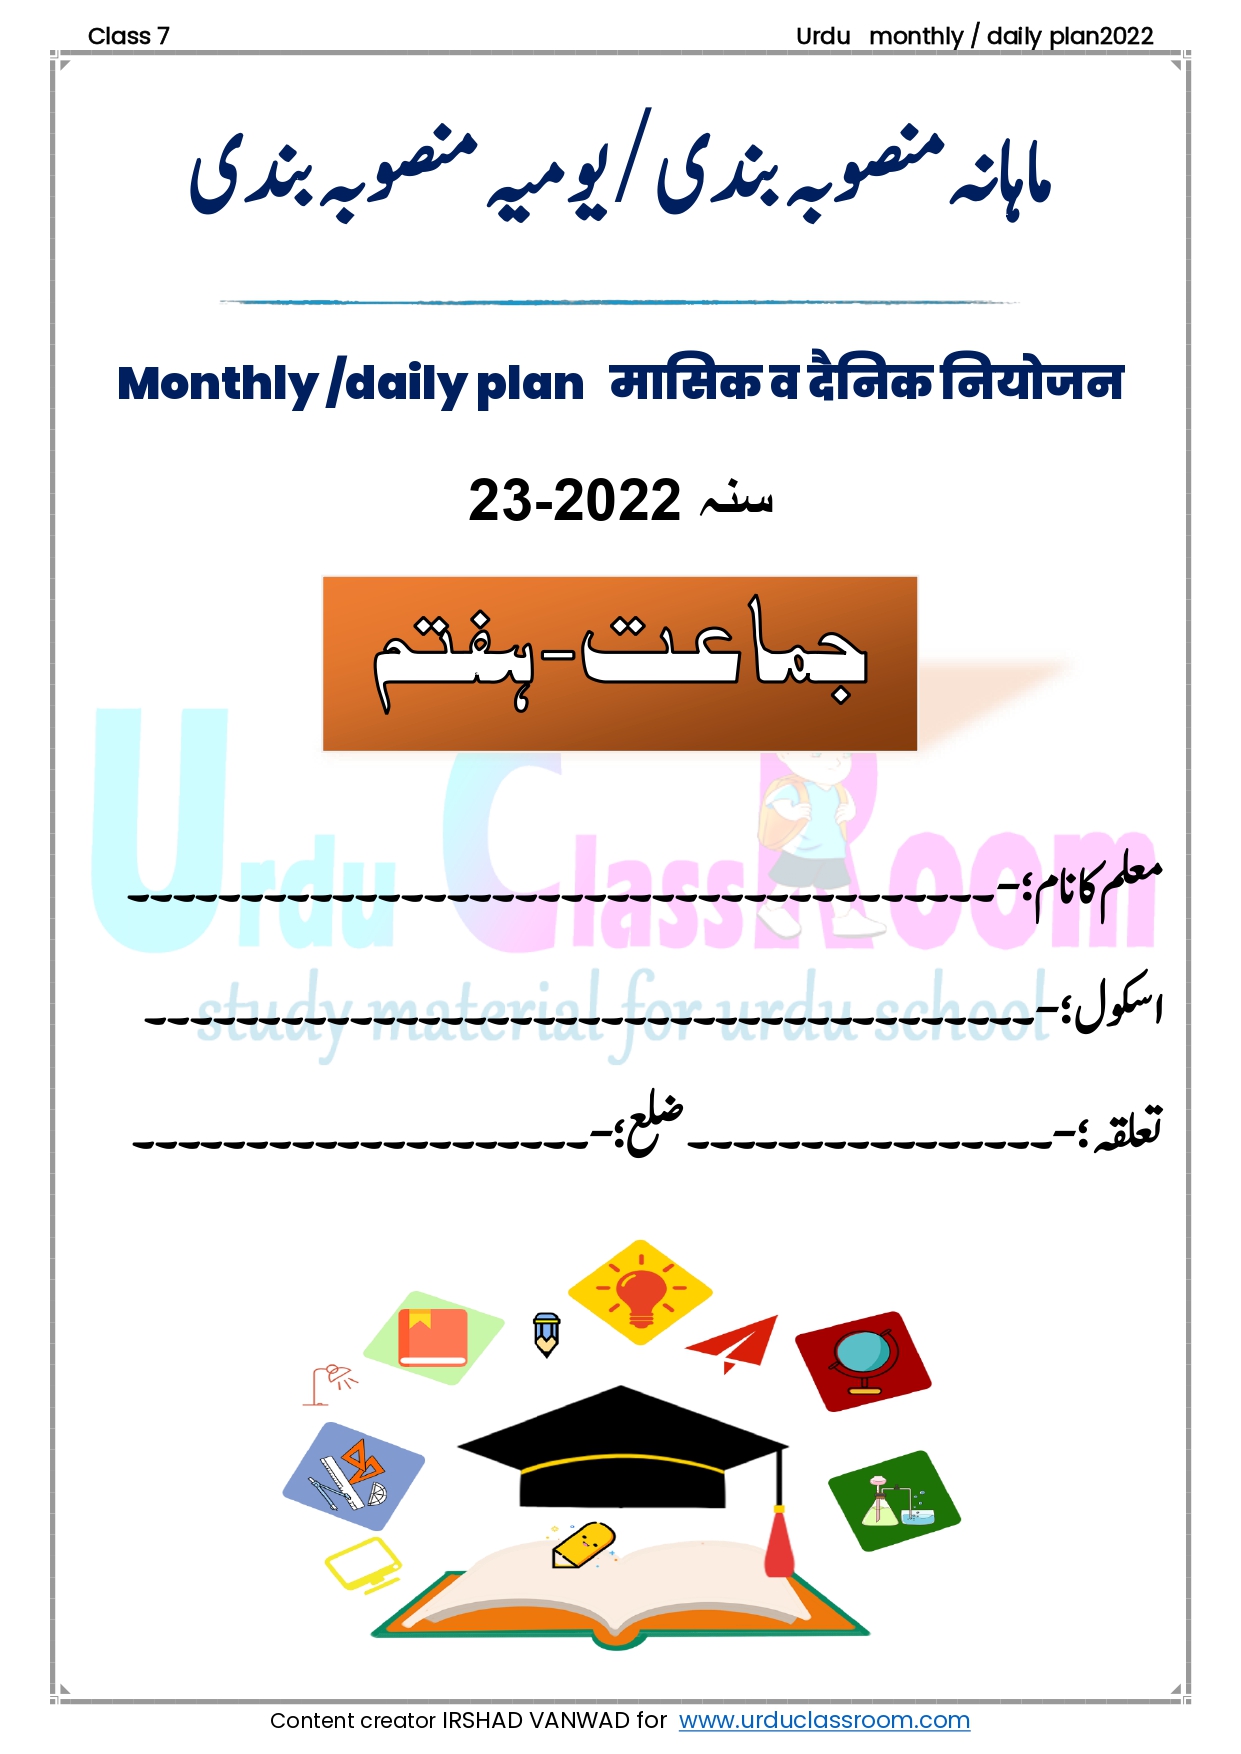 class 7 monthly and daily planning in urdu 2022